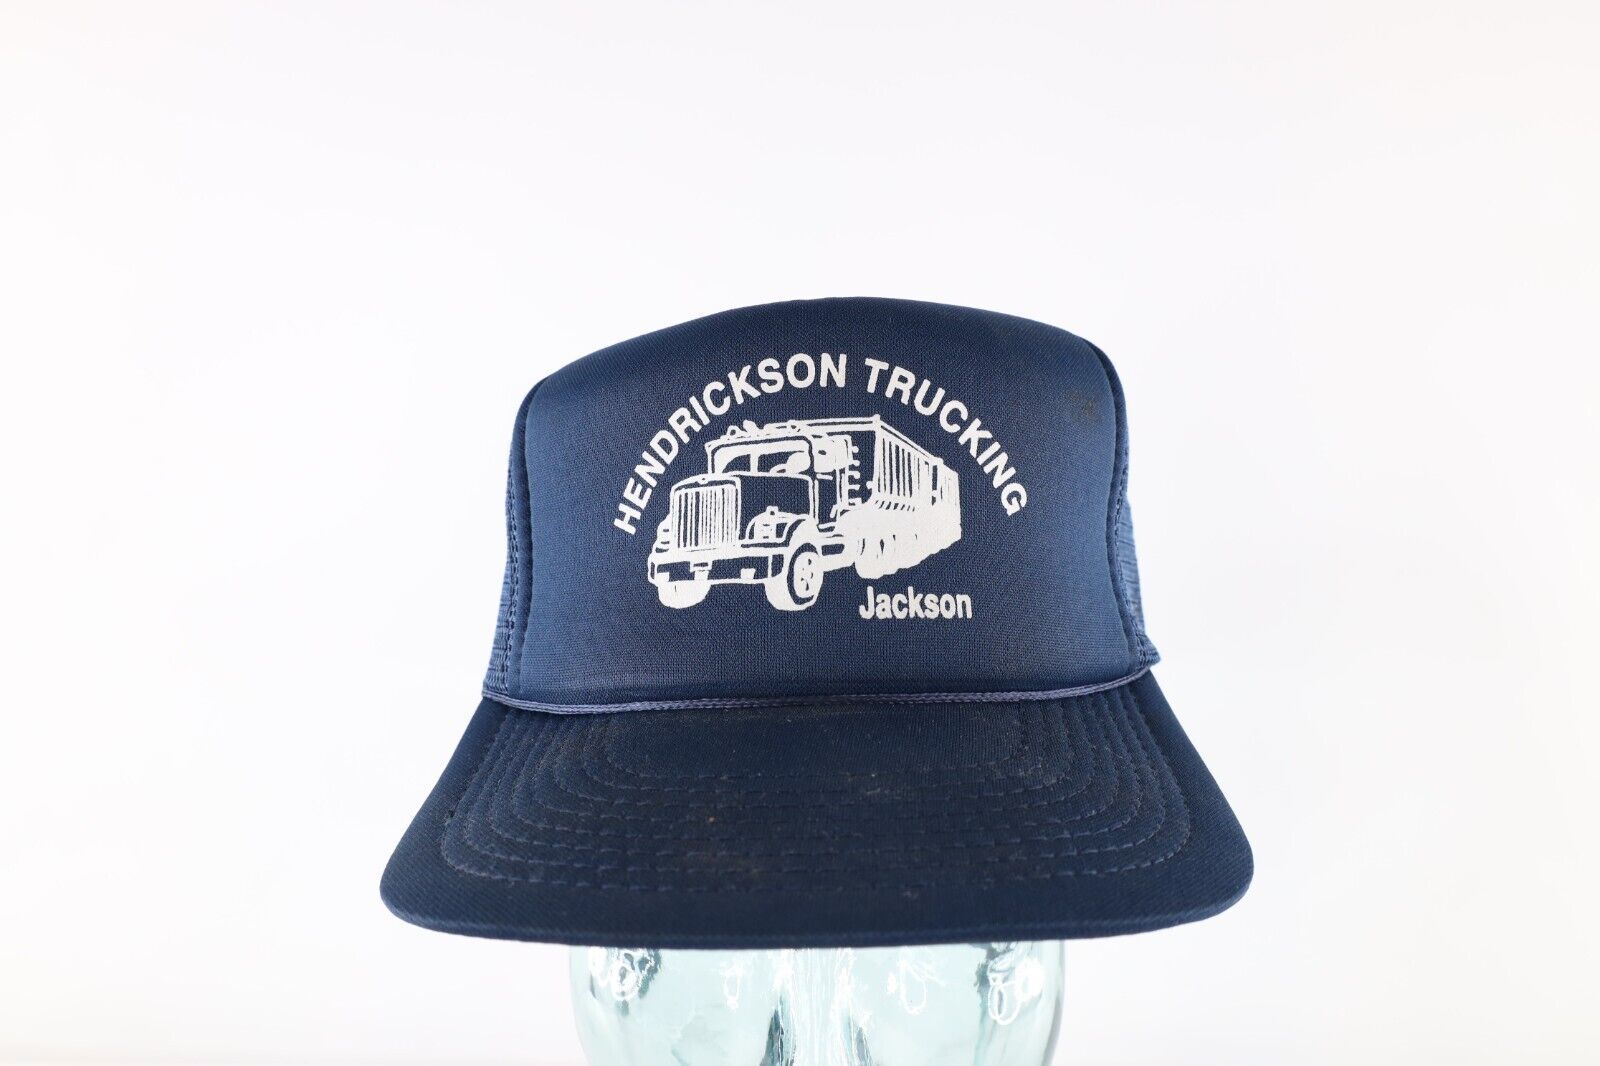 Primary image for Vintage 80s Distressed Hendrickson Trucking Spell Out Trucker Hat Snapback Blue